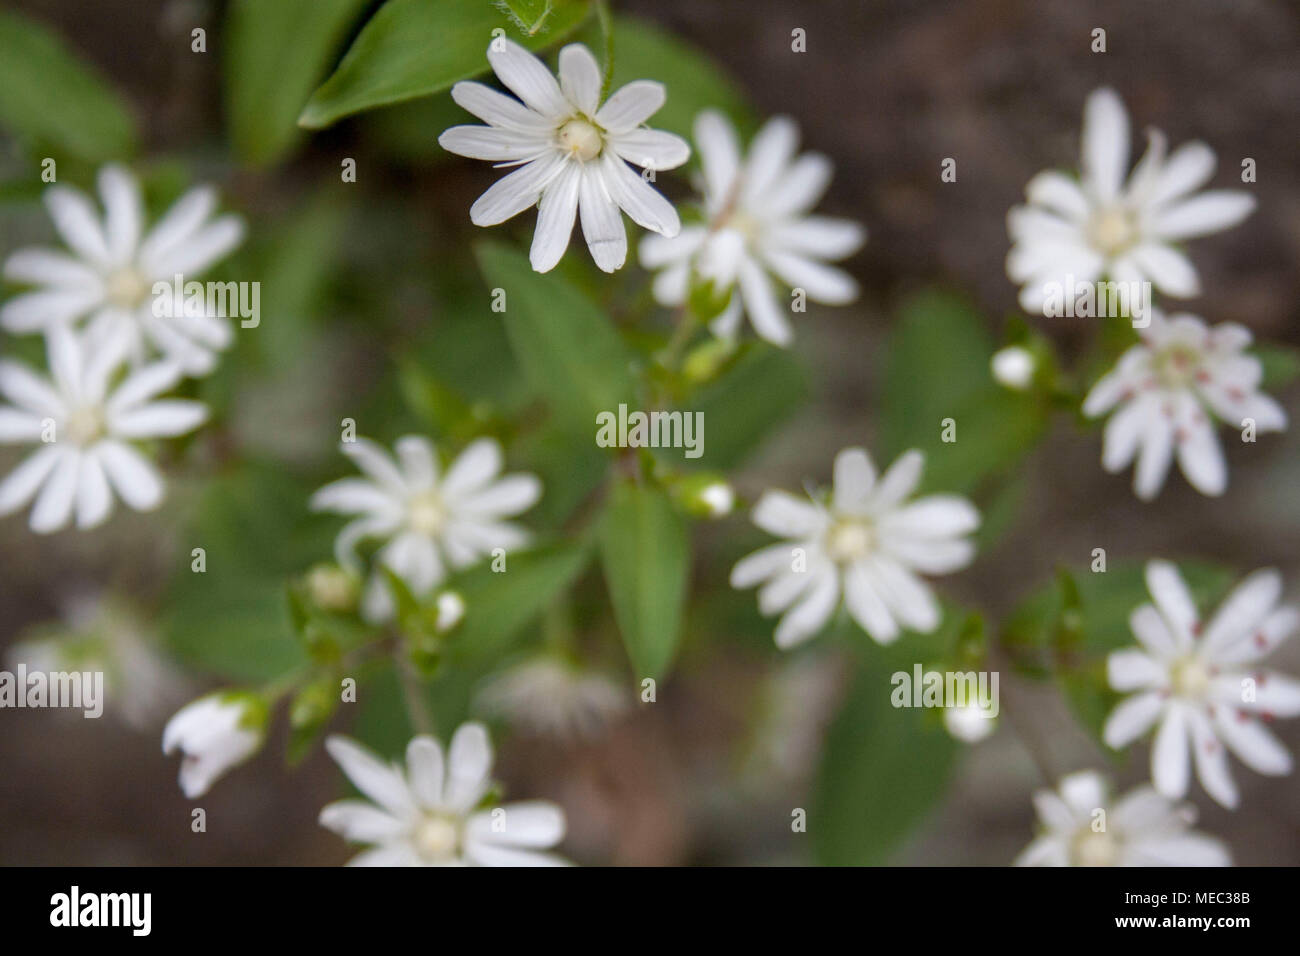 Background soft focus image of white star chickweed wildflowers. Stock Photo